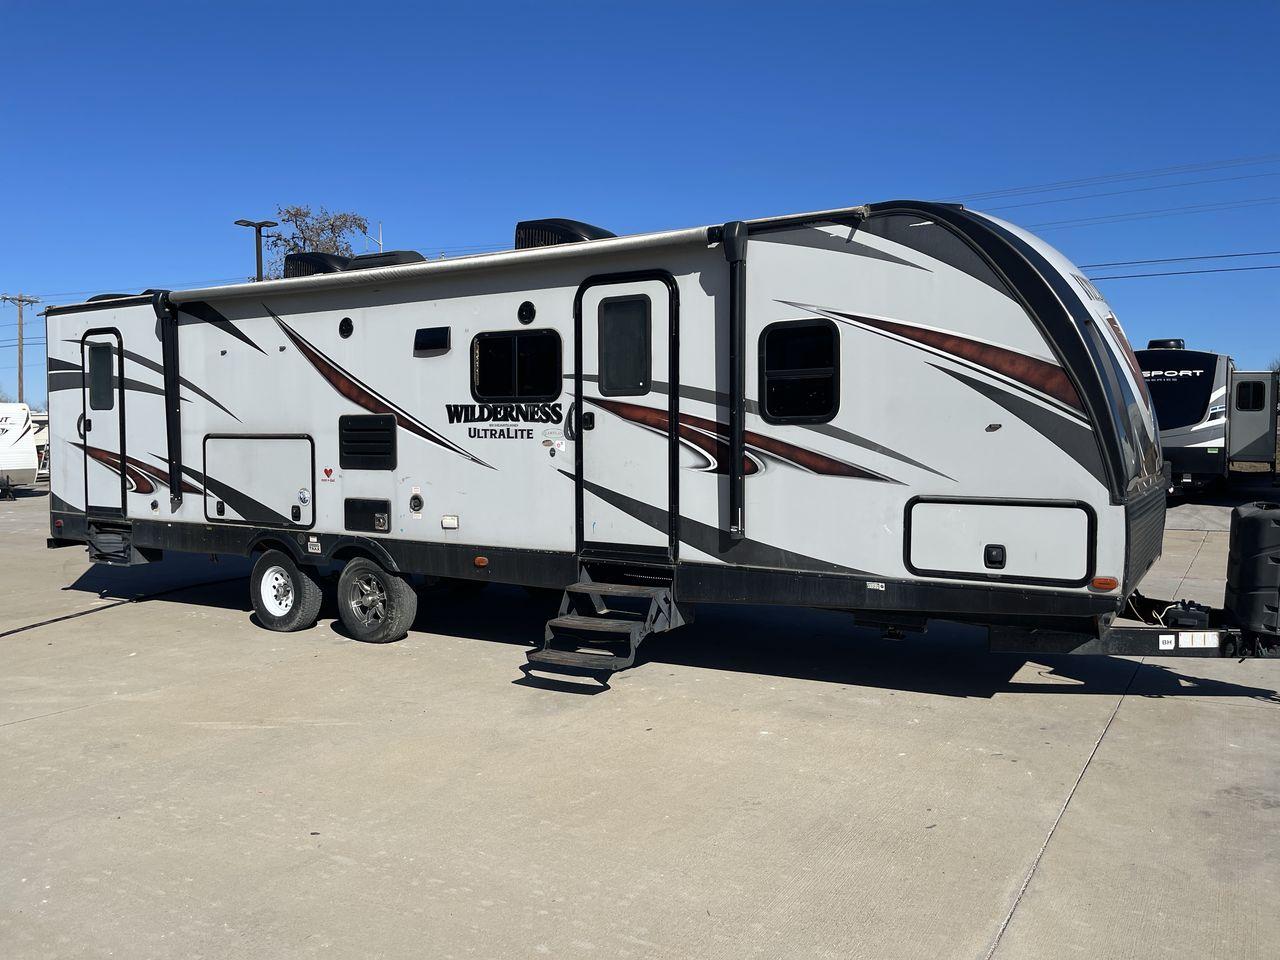 2018 GRAY HEARTLAND WILDERNESS USED 3125 (5SFNB3526JE) , Length: 35.75 ft. | Dry Weight: 6,840 lbs. | Gross Weight: 8,600 lbs. | Slides: 1 transmission, located at 4319 N Main Street, Cleburne, TX, 76033, (817) 221-0660, 32.435829, -97.384178 - Discover your inner adventurer with the Heartland Wilderness 3125 travel trailer from 2018. This RV offers the ideal balance of roomy living, contemporary conveniences, and tough sturdiness for your outdoor adventures. It is designed for individuals who desire both comfort and exploration. The di - Photo #22